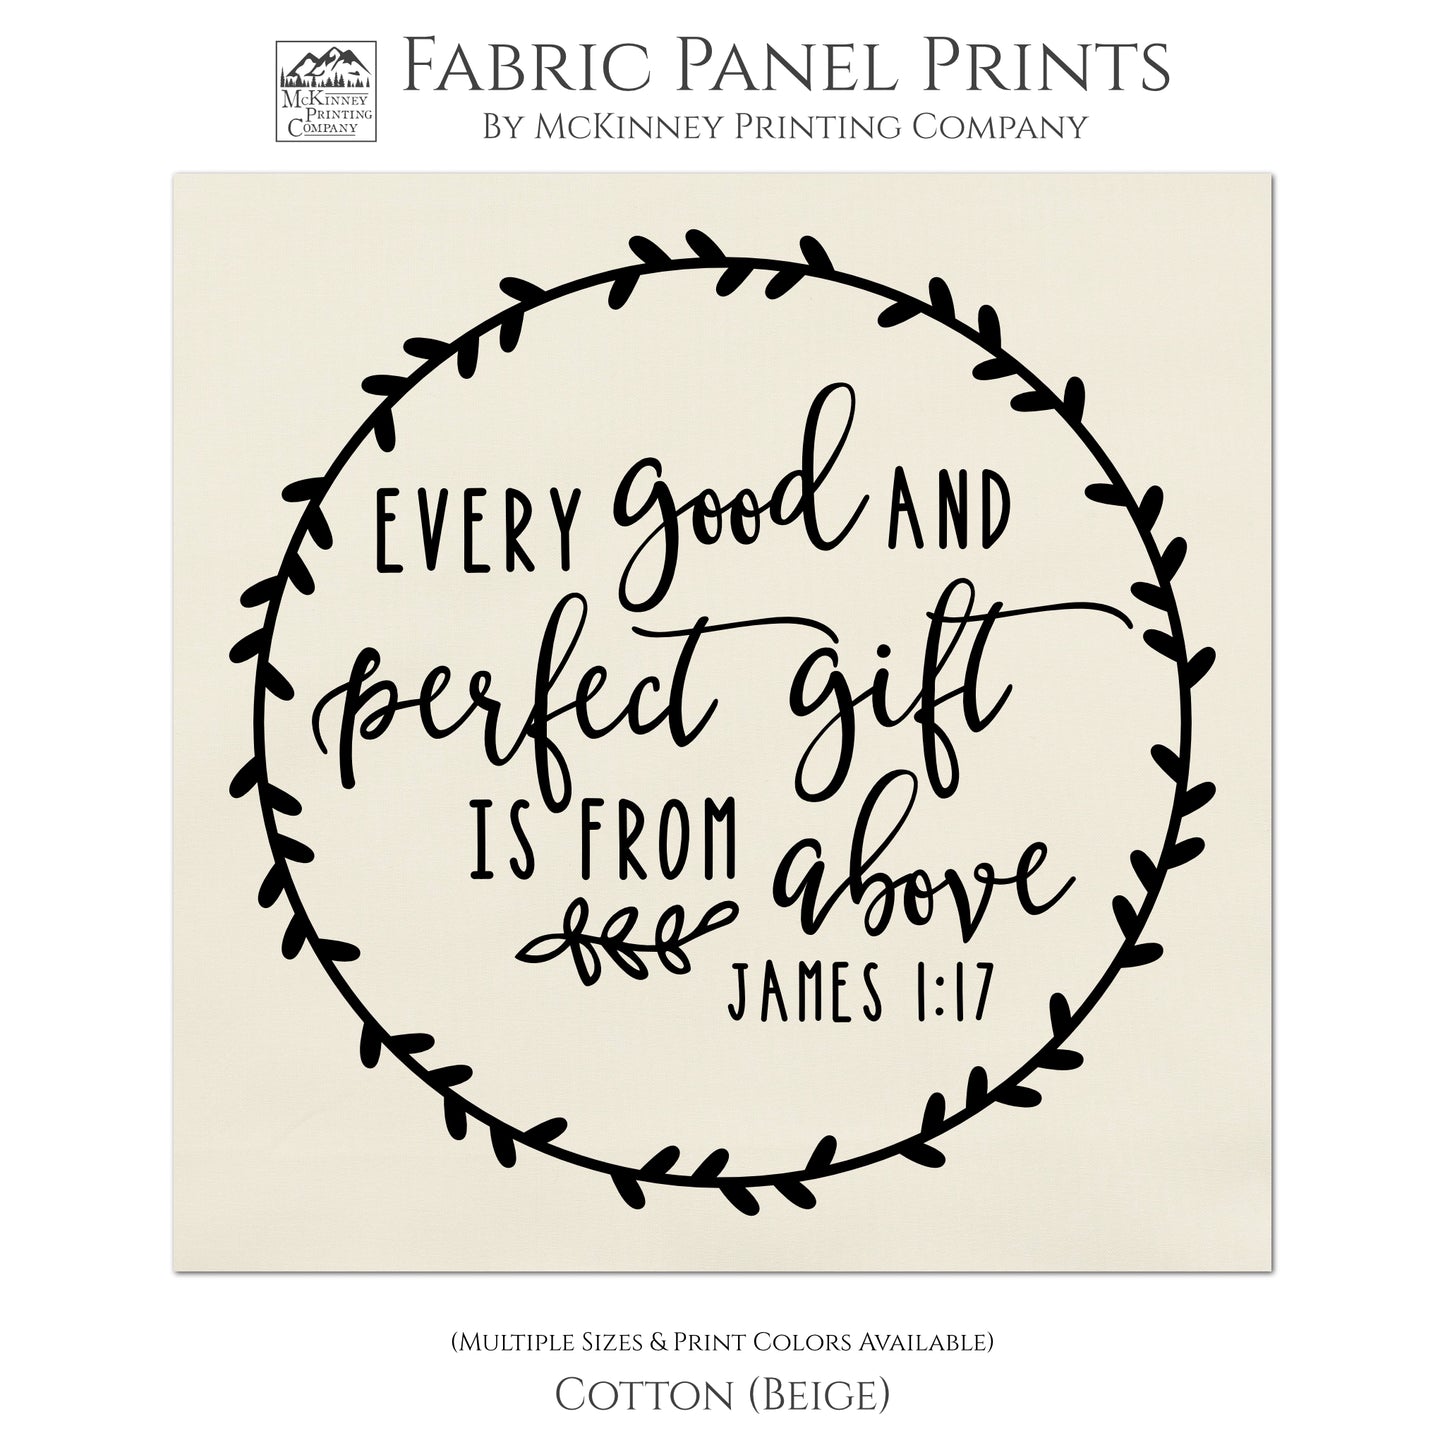 Every good and perfect gift is from above. - James 1 17, Fabric Panel Print, Quilt Block - Cotton